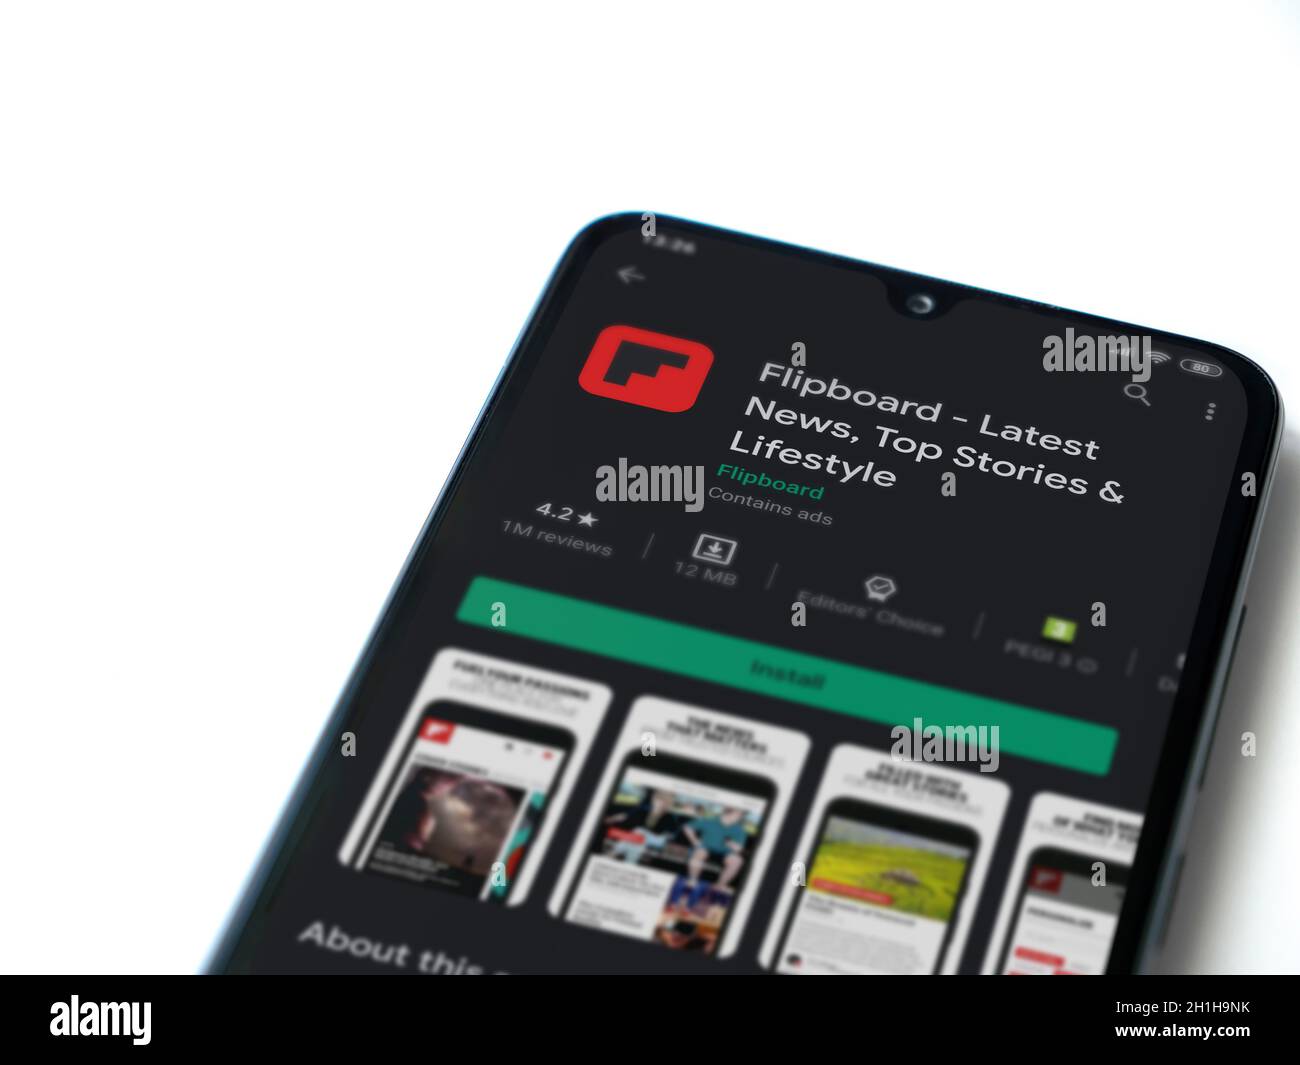 Lod, Israel - July 8, 2020: Flipboard app play store page on the display of a black mobile smartphone isolated on white background. Top view flat lay Stock Photo